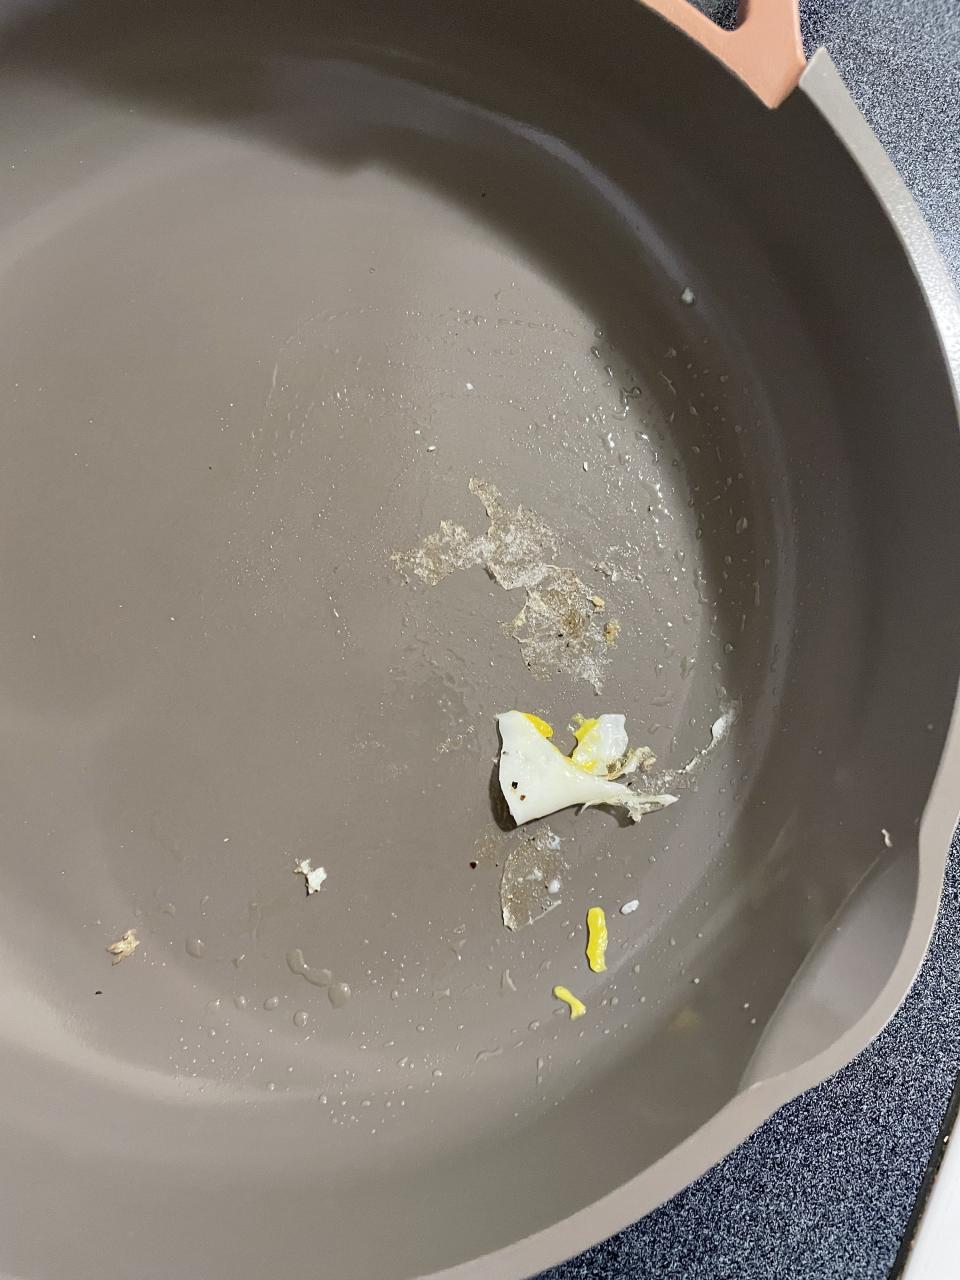 Some egg left in the pan